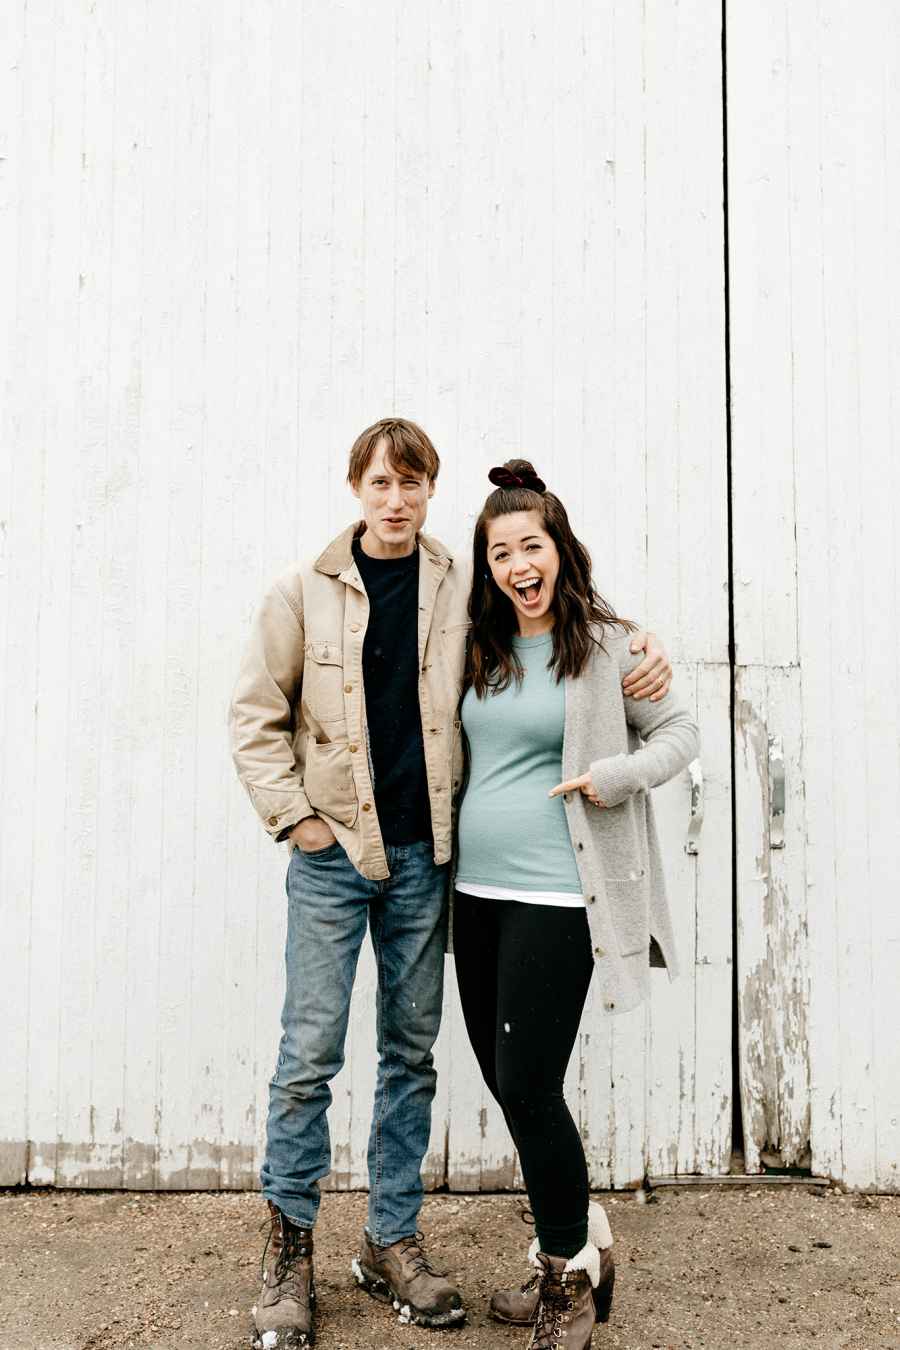 'Girl Meets Farm' Star Molly Yeh Is Pregnant With First Child Us Weekly